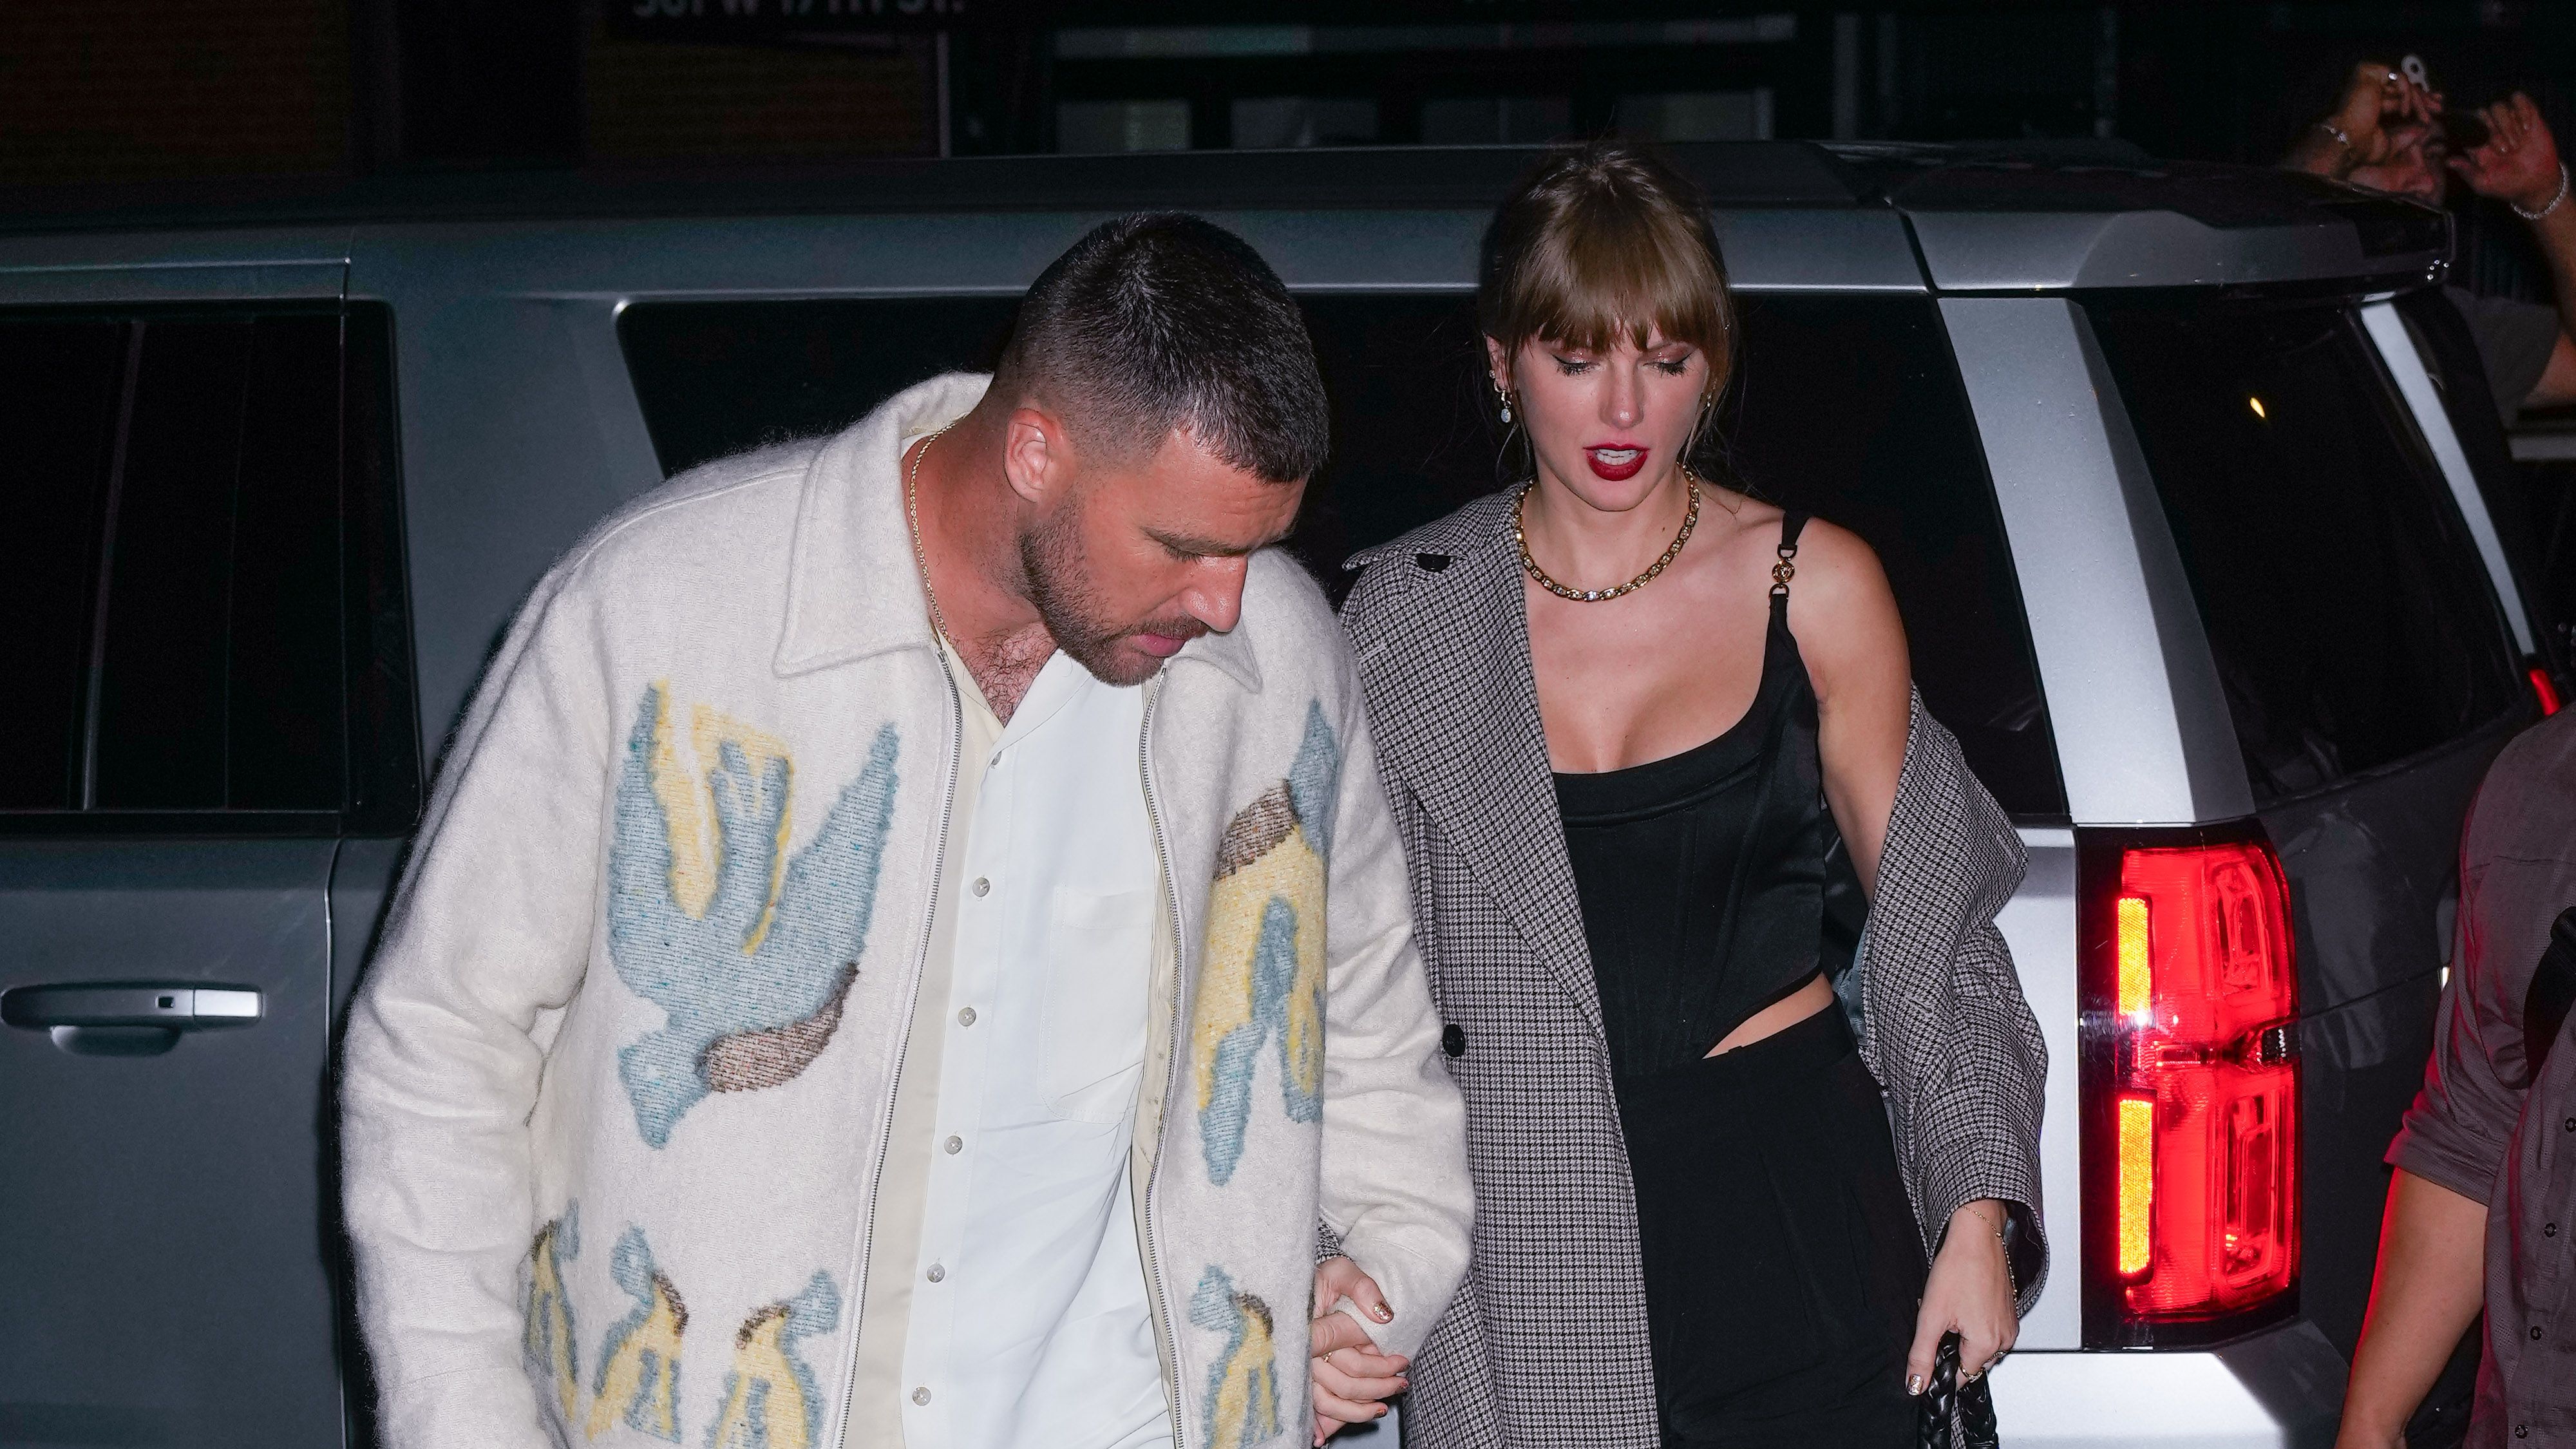 A Body Language Expert ﻿Analyzes ﻿Taylor ﻿Swift and Travis ﻿Kelce's Date  Pics